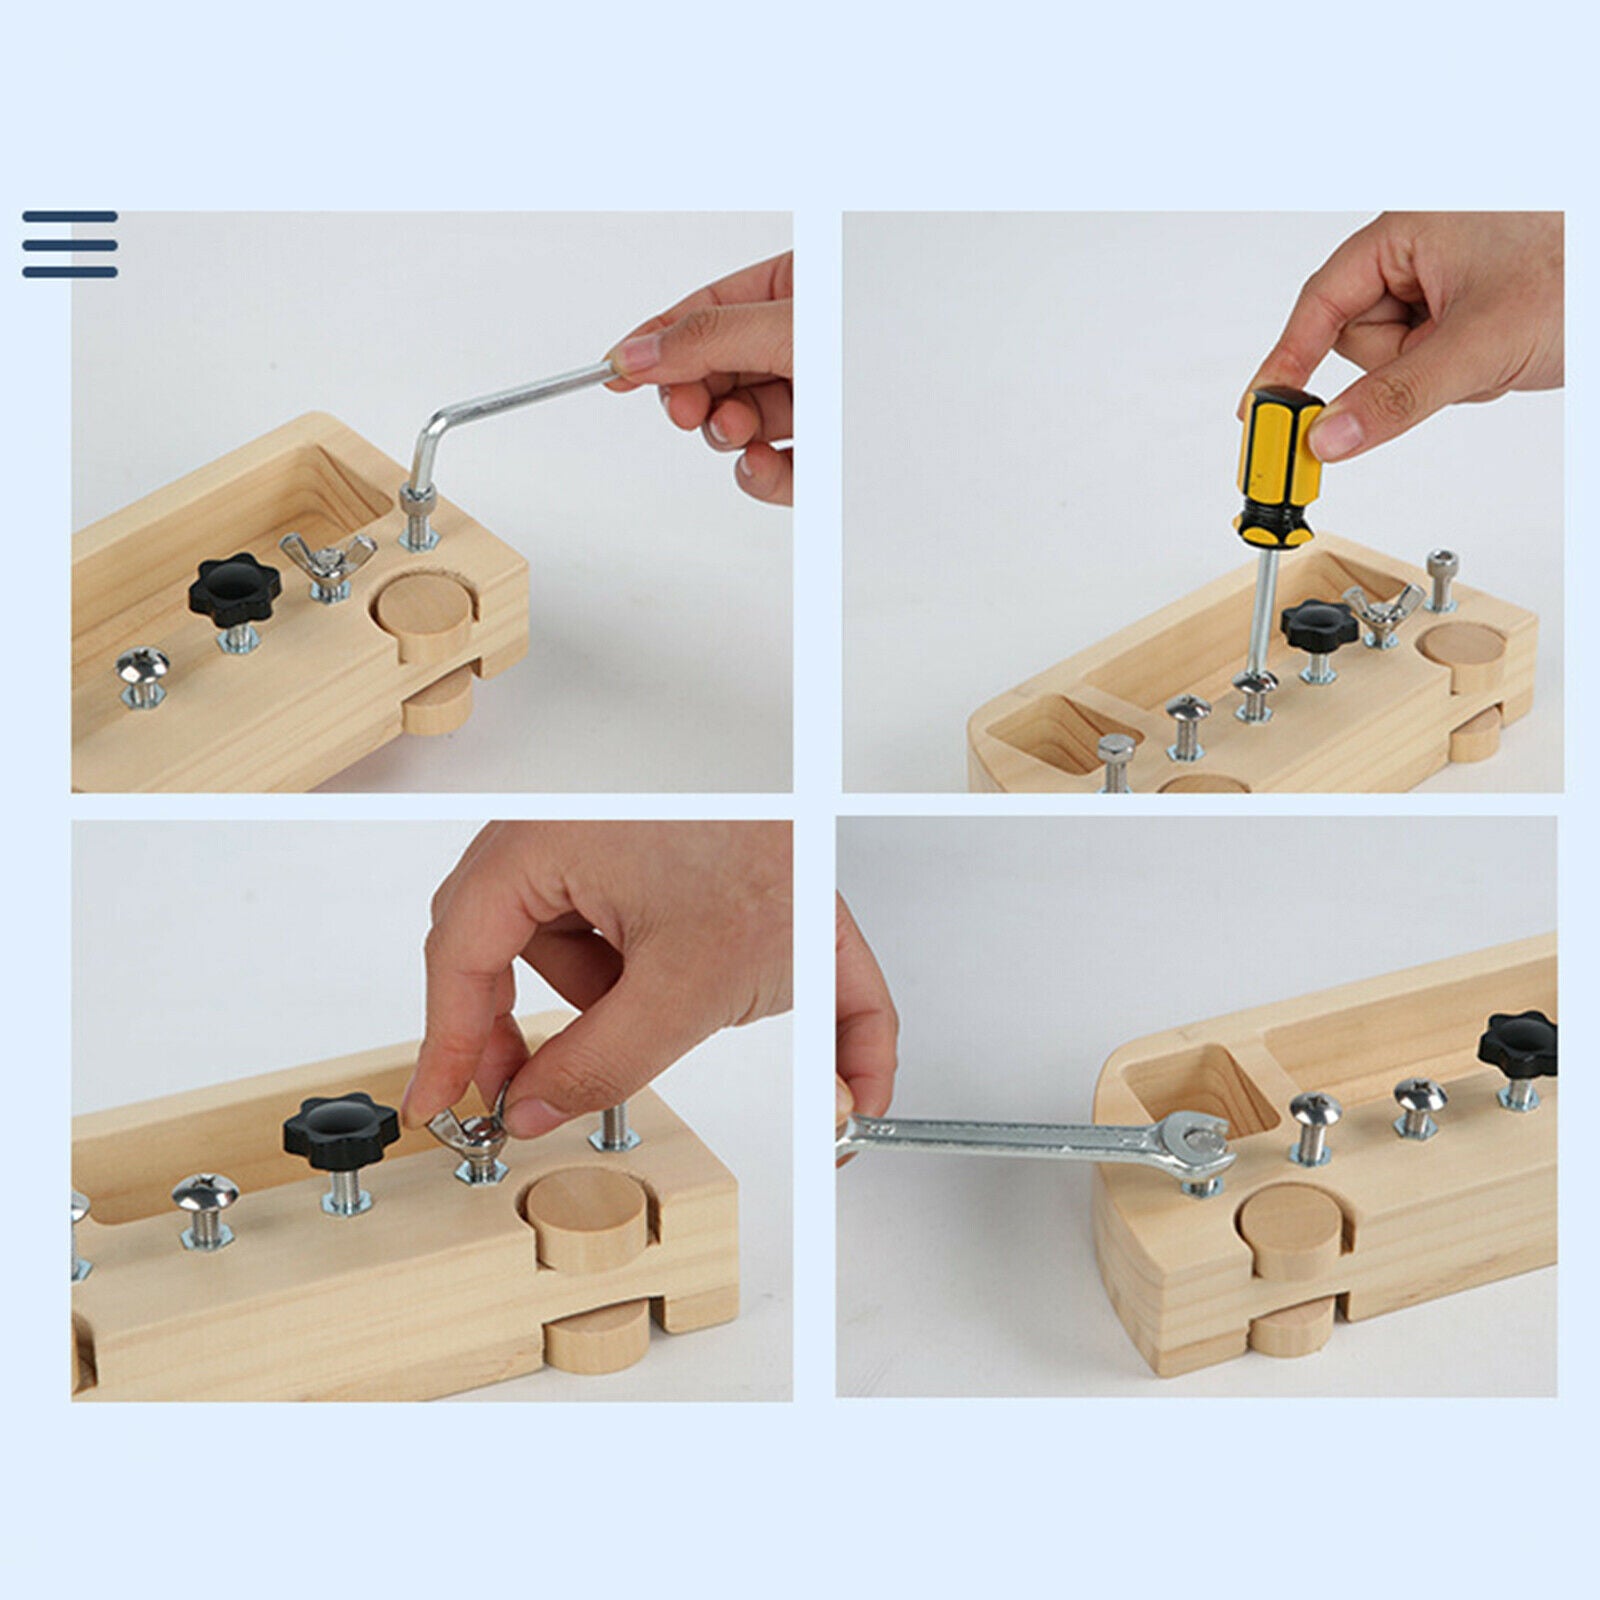 Montessori Screw Driver Board Toddlers Educational Sensory Toys Wooden Toy